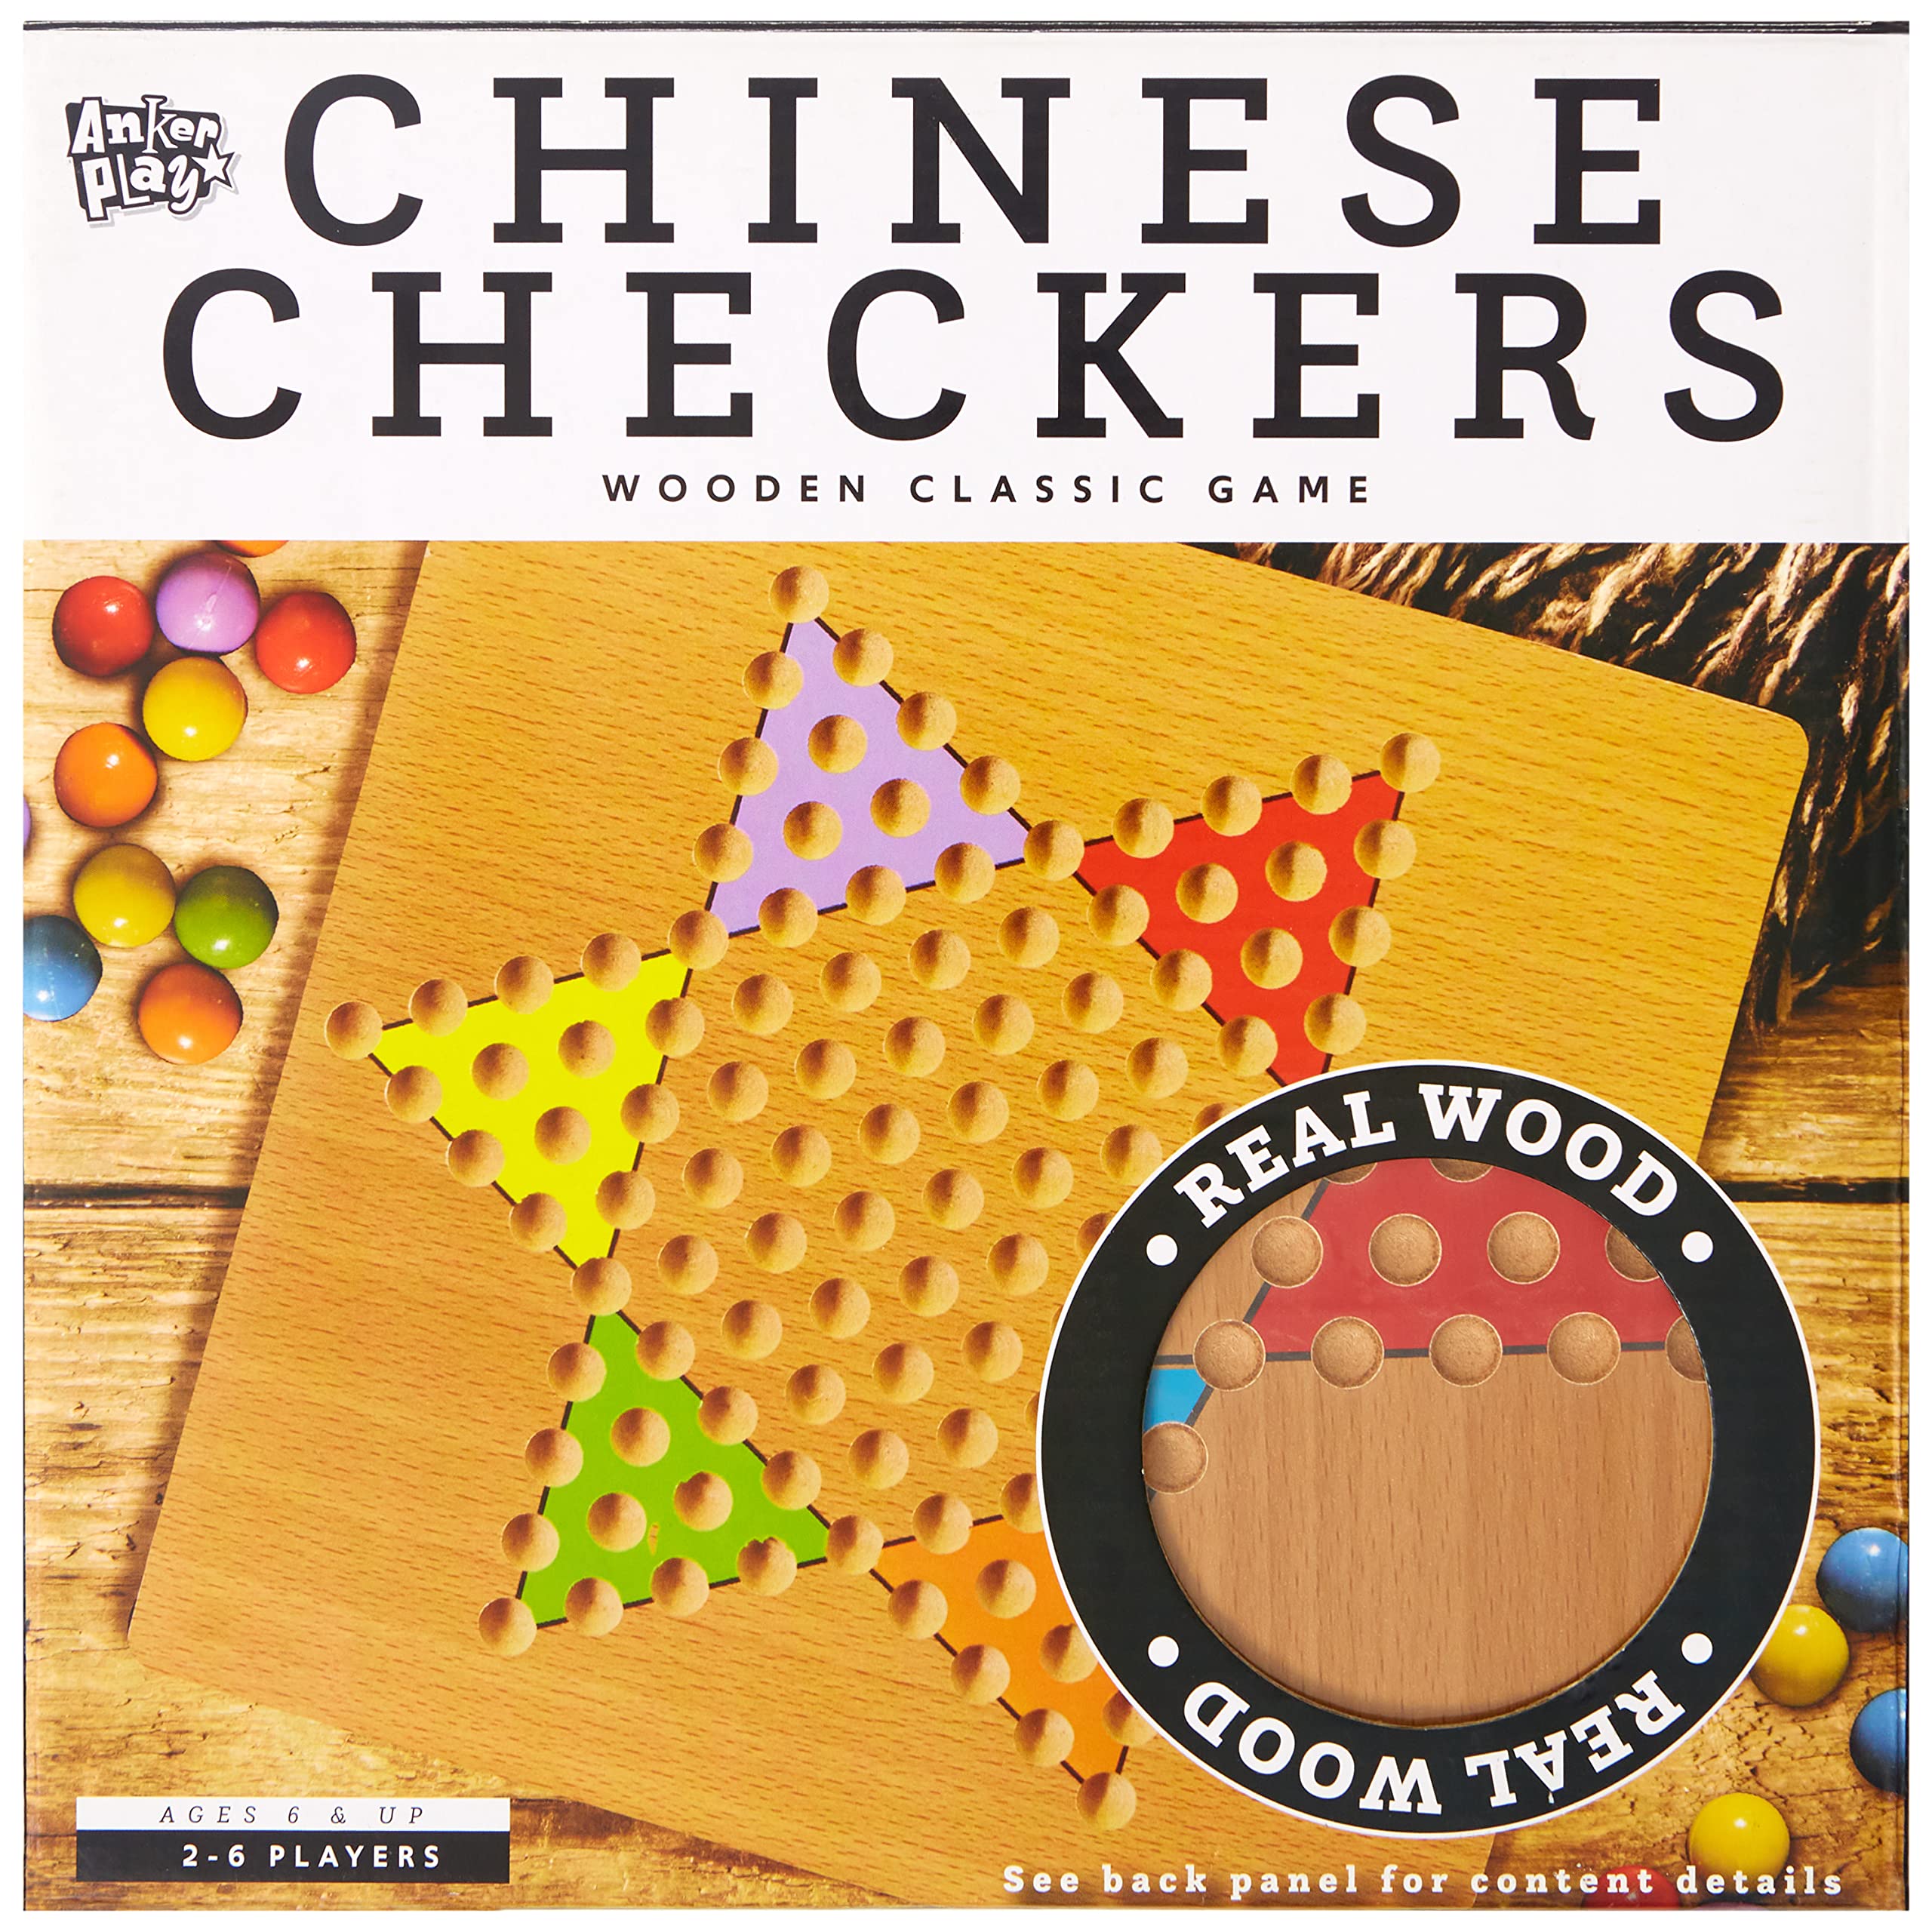 Anker Play Family Game Gallery | 11 Wooden Classic 2-Player Games